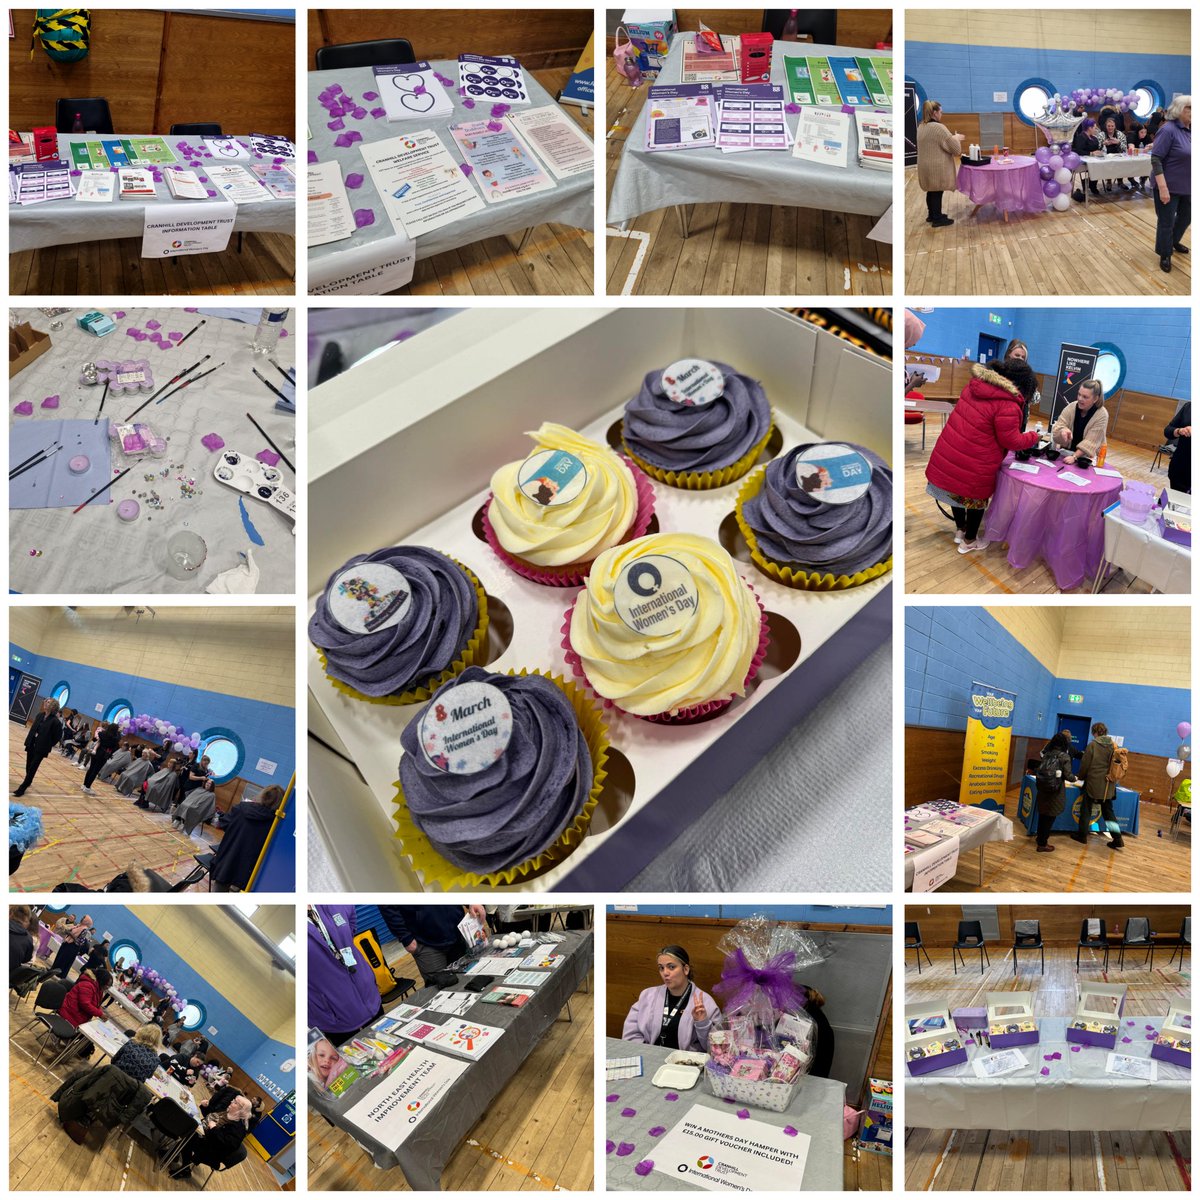 Great day at @CranhillDT International Womans Day event 😍. They had loads of activities and people from different organisations there. As well as free haircuts and massage's. @peterpalm18 @mcc_herriot @TomChapman91